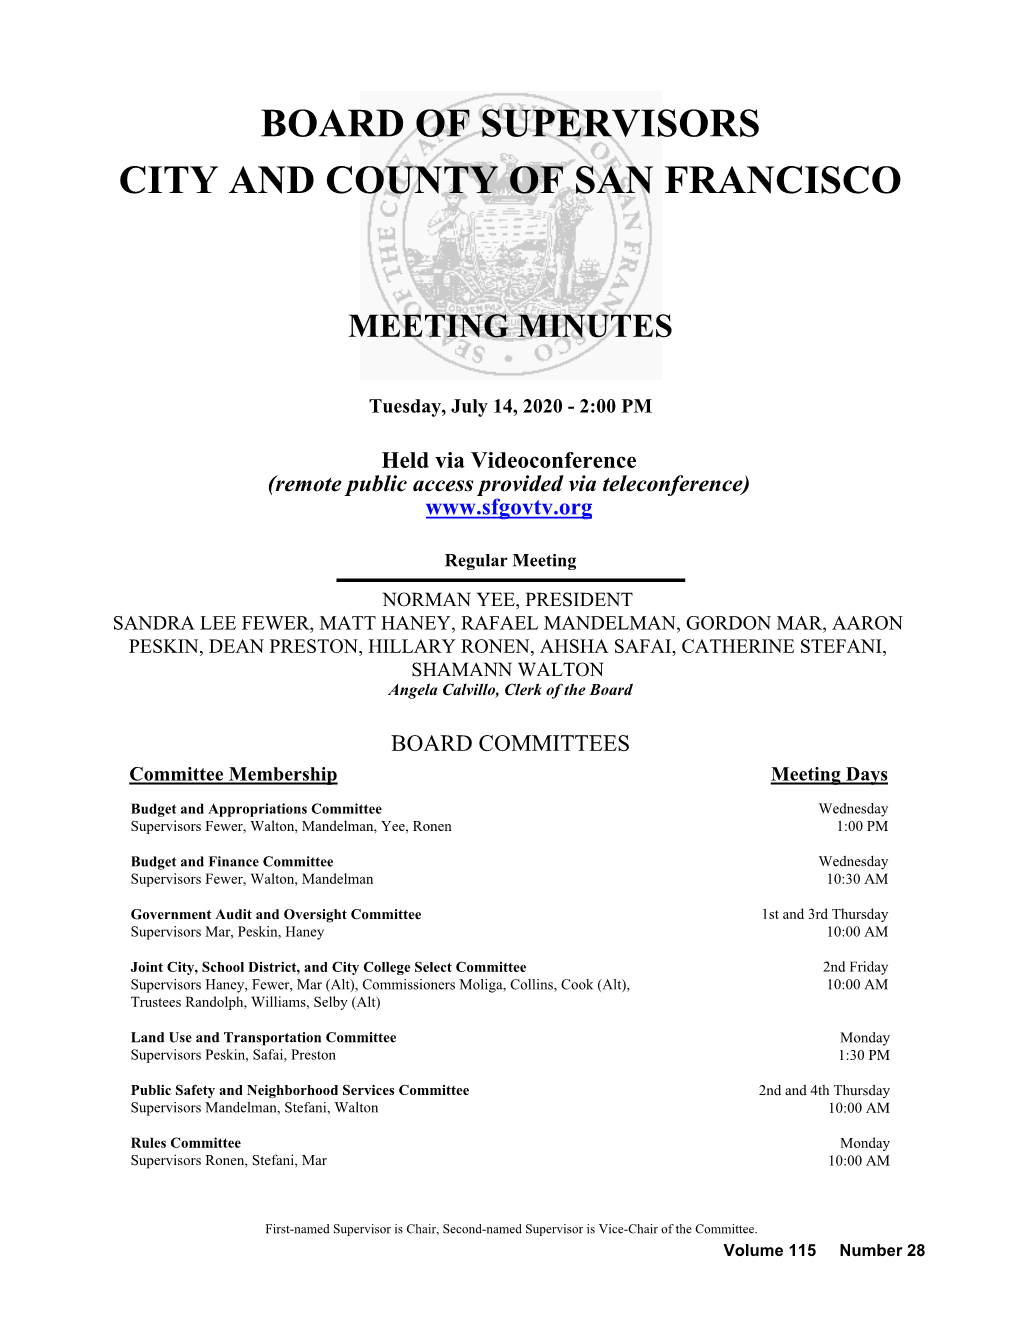 Board of Supervisors City and County of San Francisco